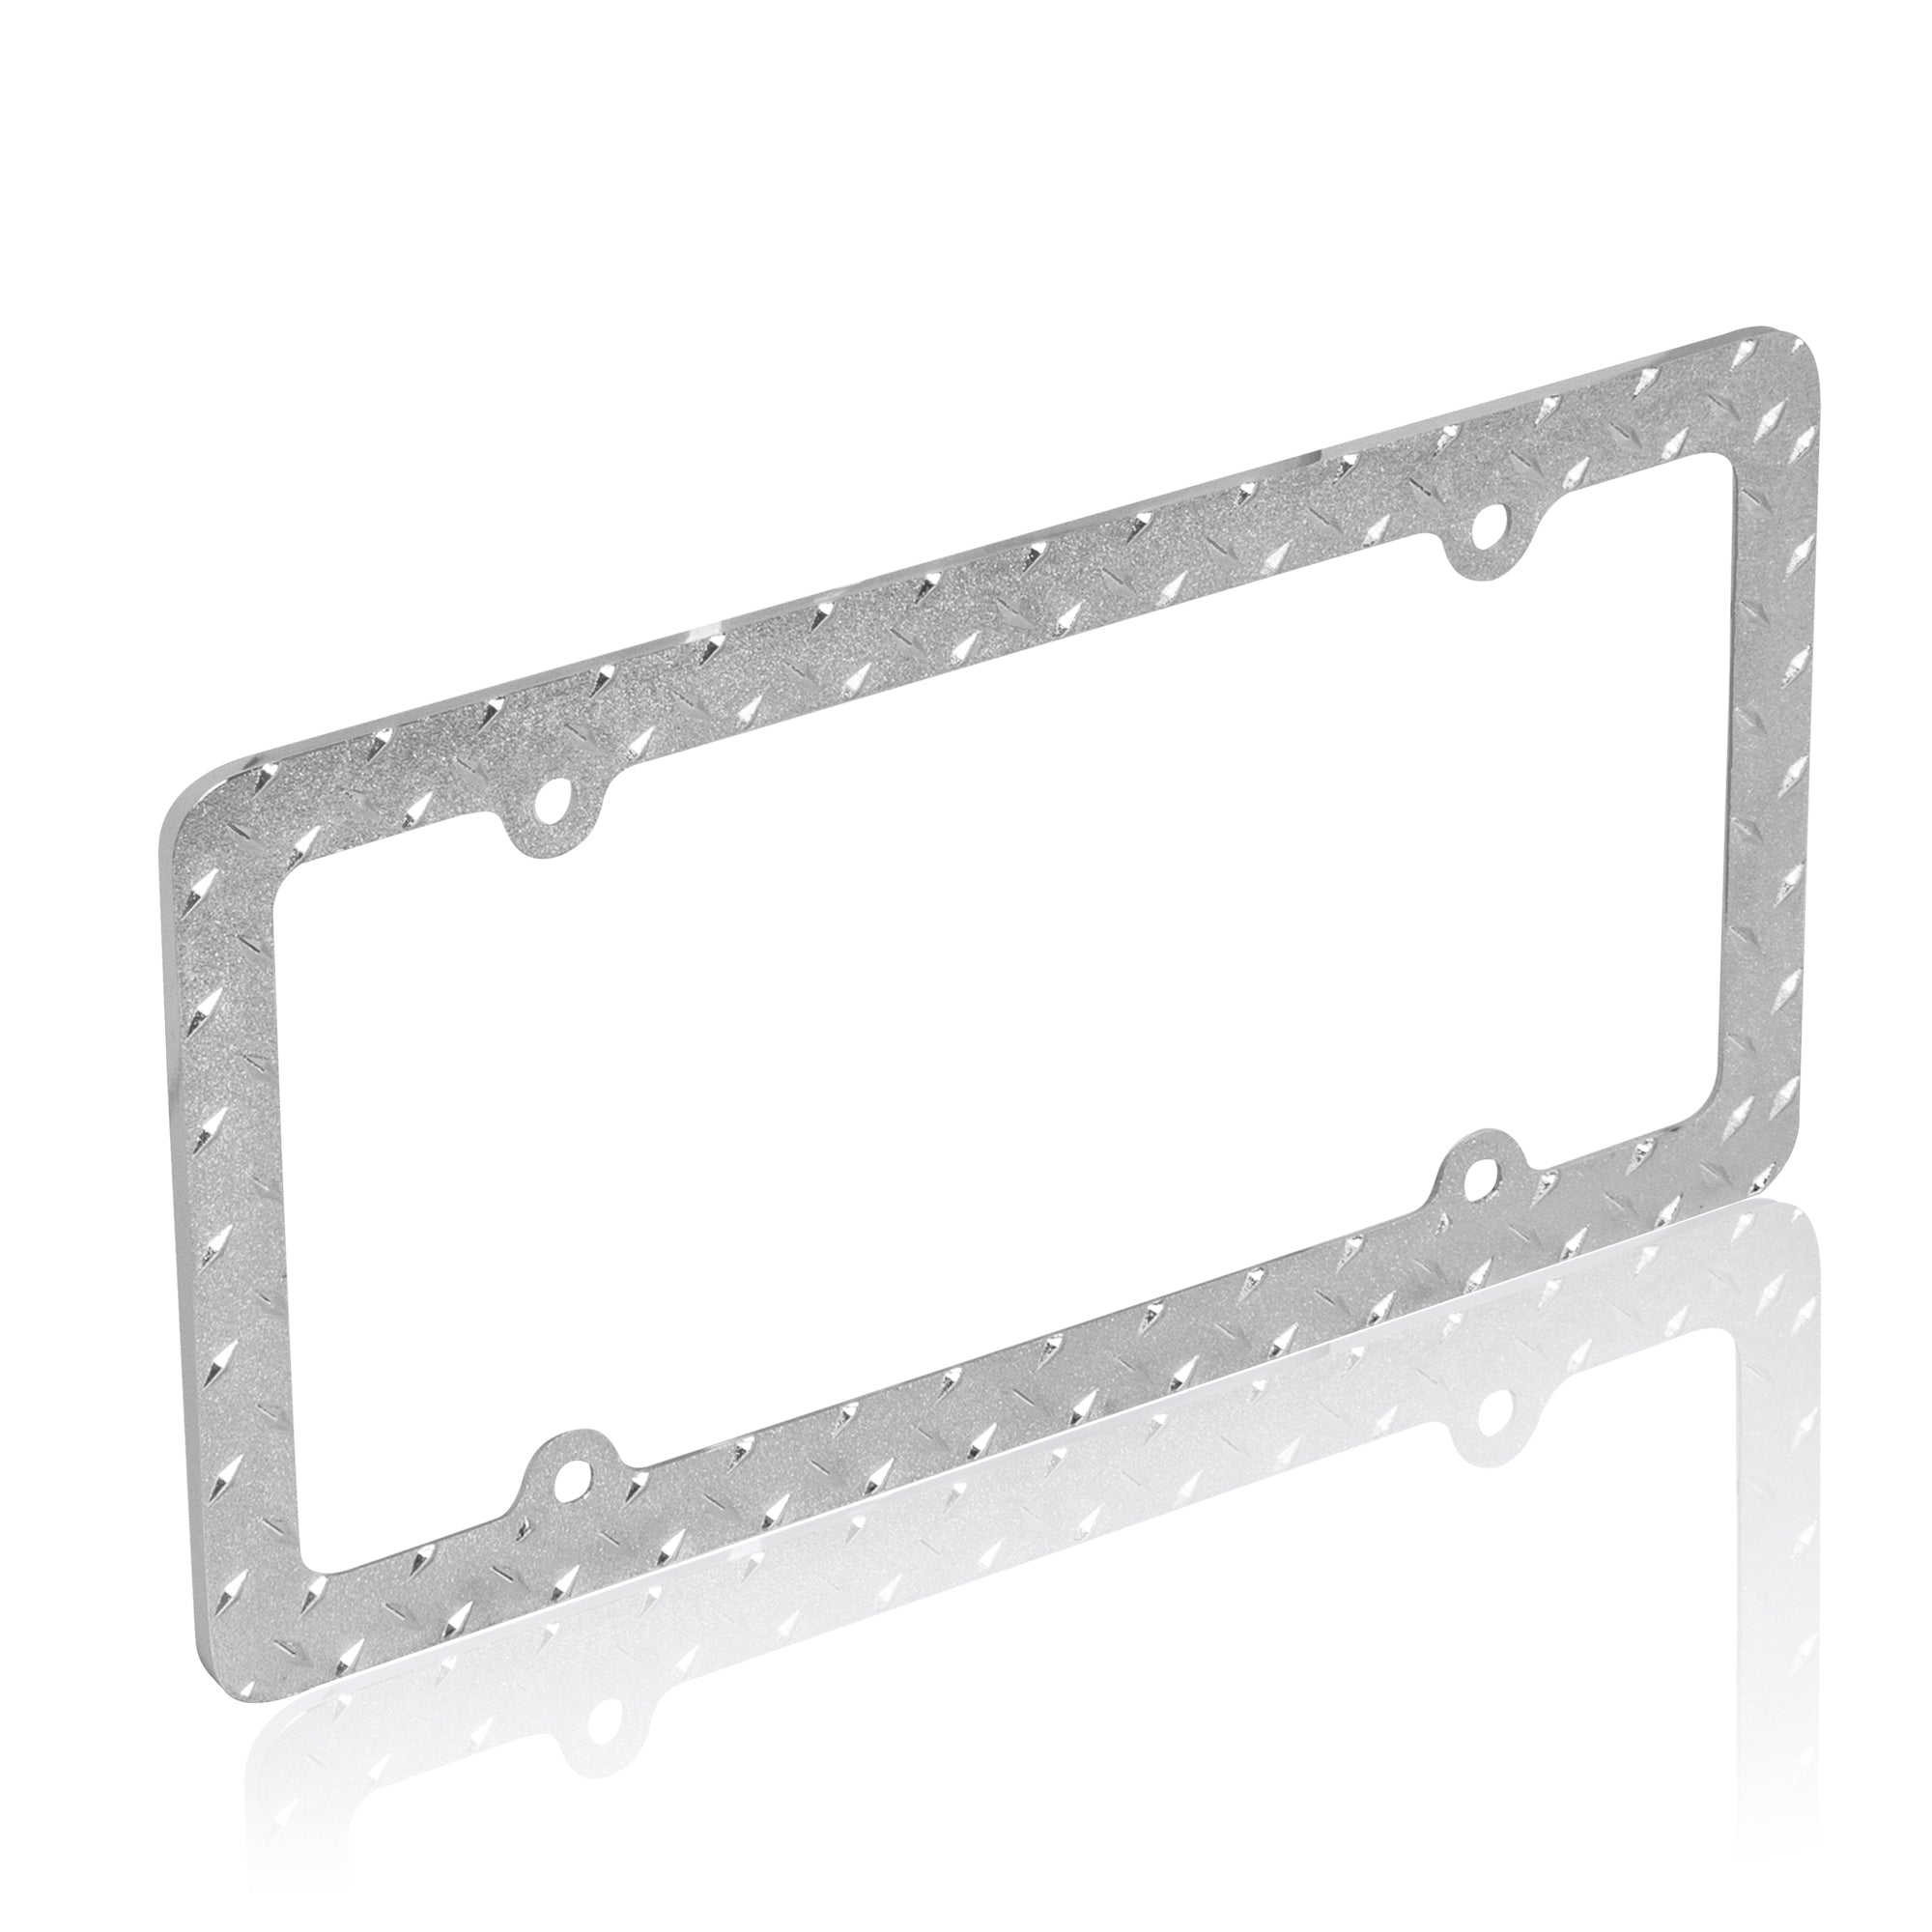 Heavy Duty Rust-Proof Chrome Plated Stainless-Steel Metal Diamond License Plate Frame Universal Size for Car Truck SUV (Pack of 2) - 2-Pack